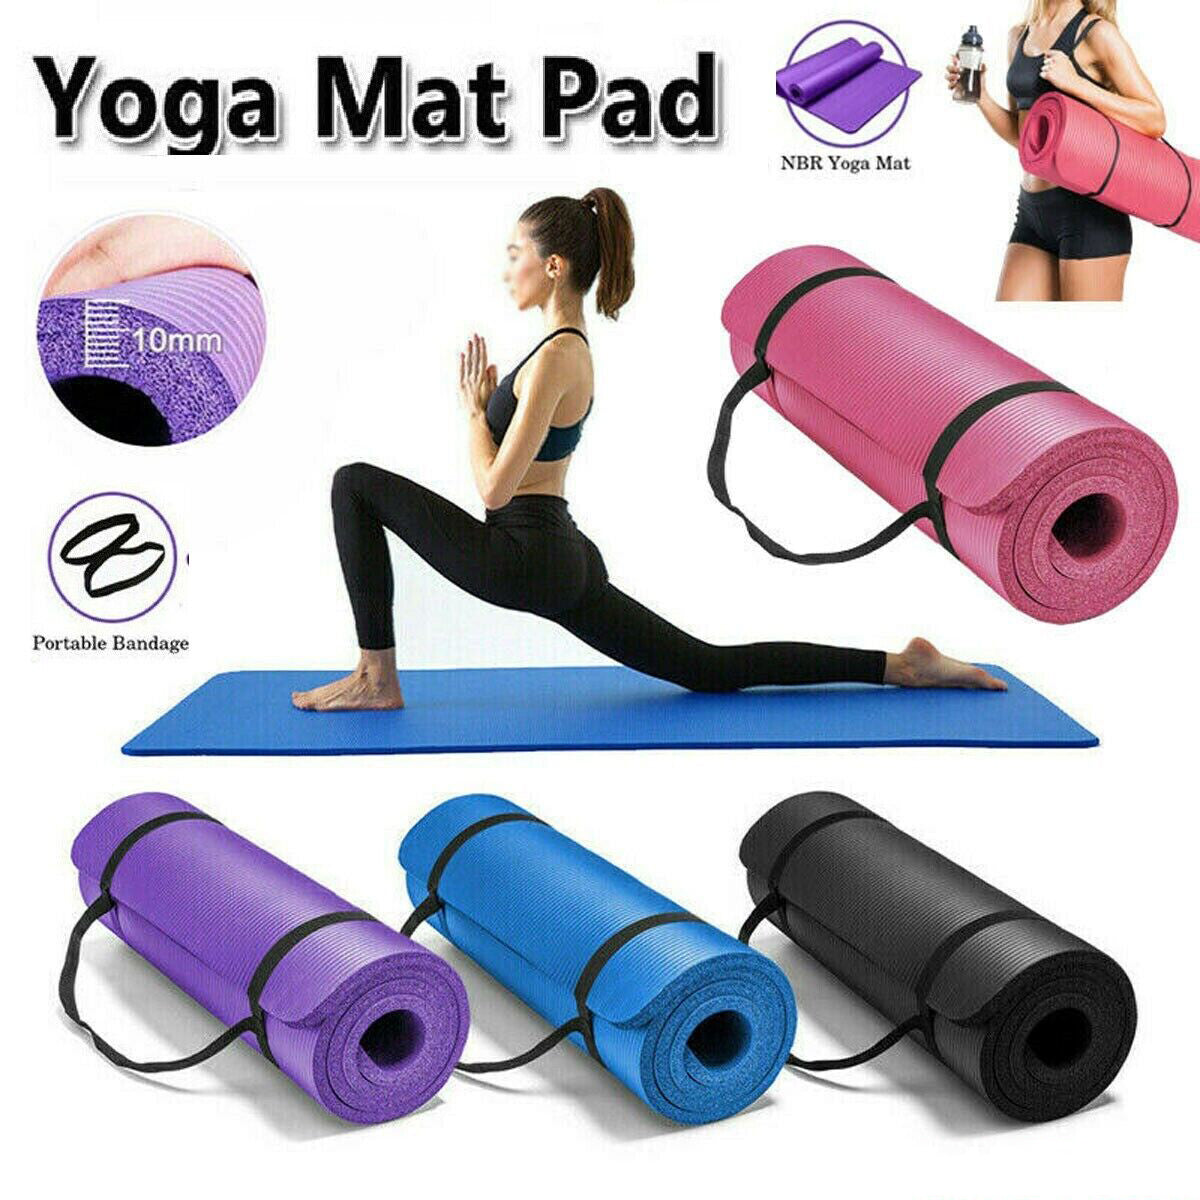 Waterproof Yoga Pilates Mat Case Bag Backpack Multifunctional Backpacking  Pouch For Wholesale With From Walon123, $5.75